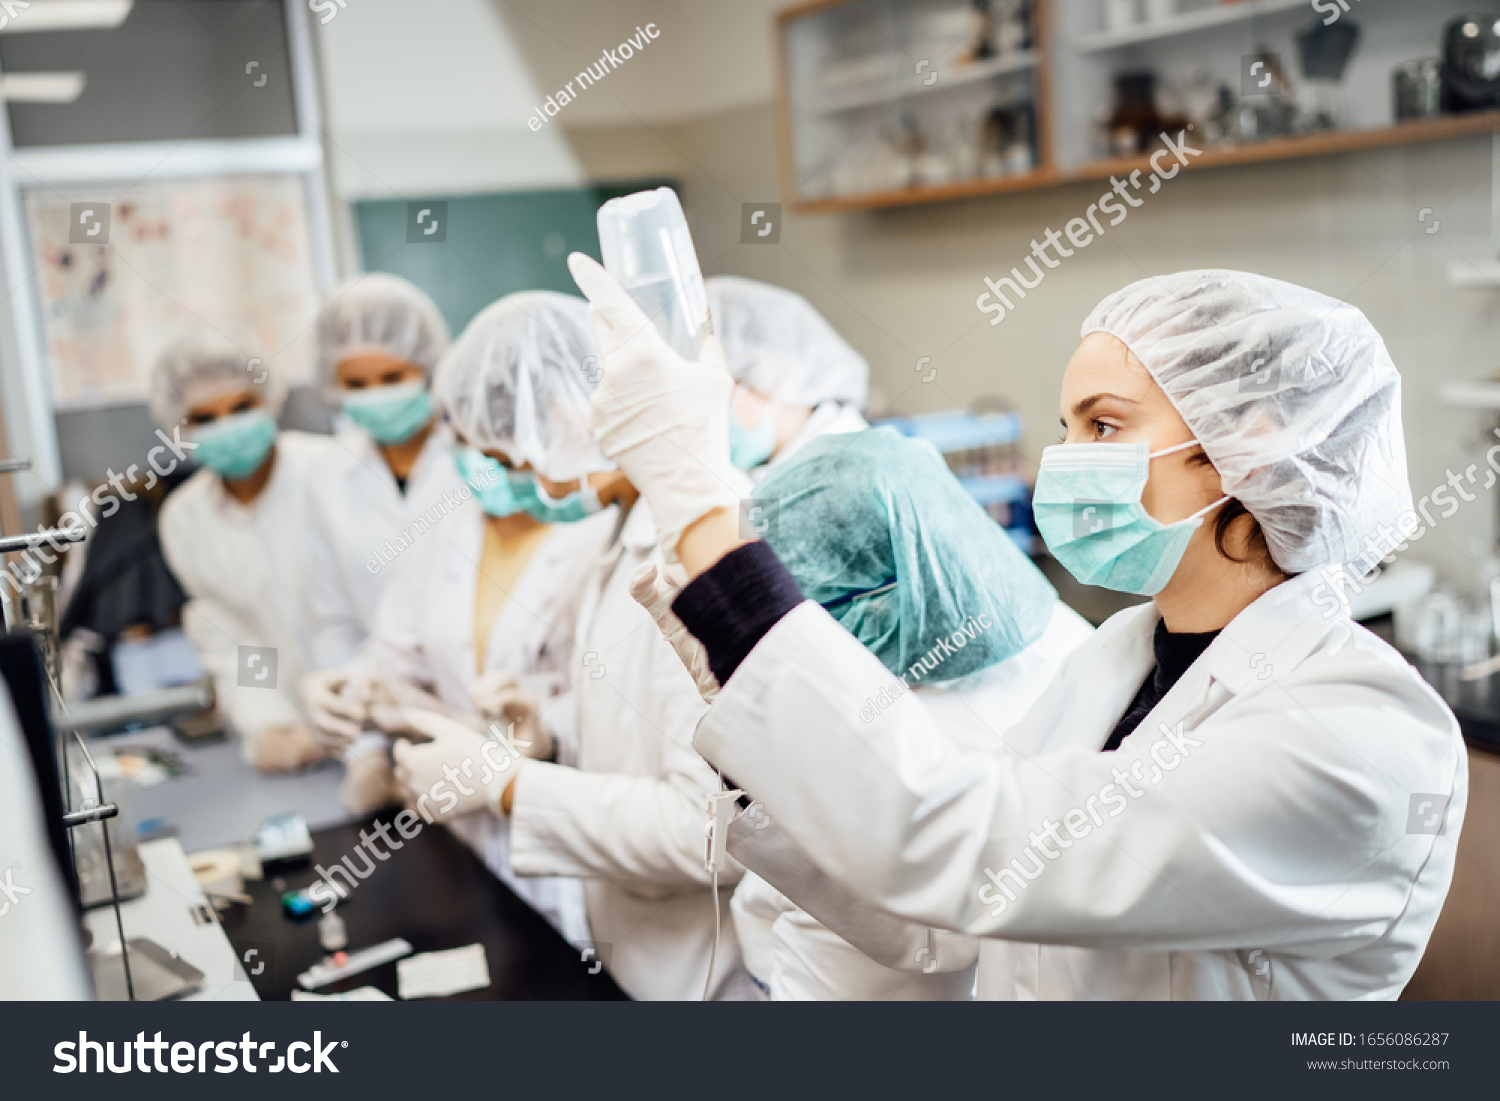 Team of pharmacists developing parenteral antibody antivirus.Pharmaceutical development of a new vaccine.Parenteral antibiotic safety control test examination in the cleanroom.Virus epidemic concept #1656086287